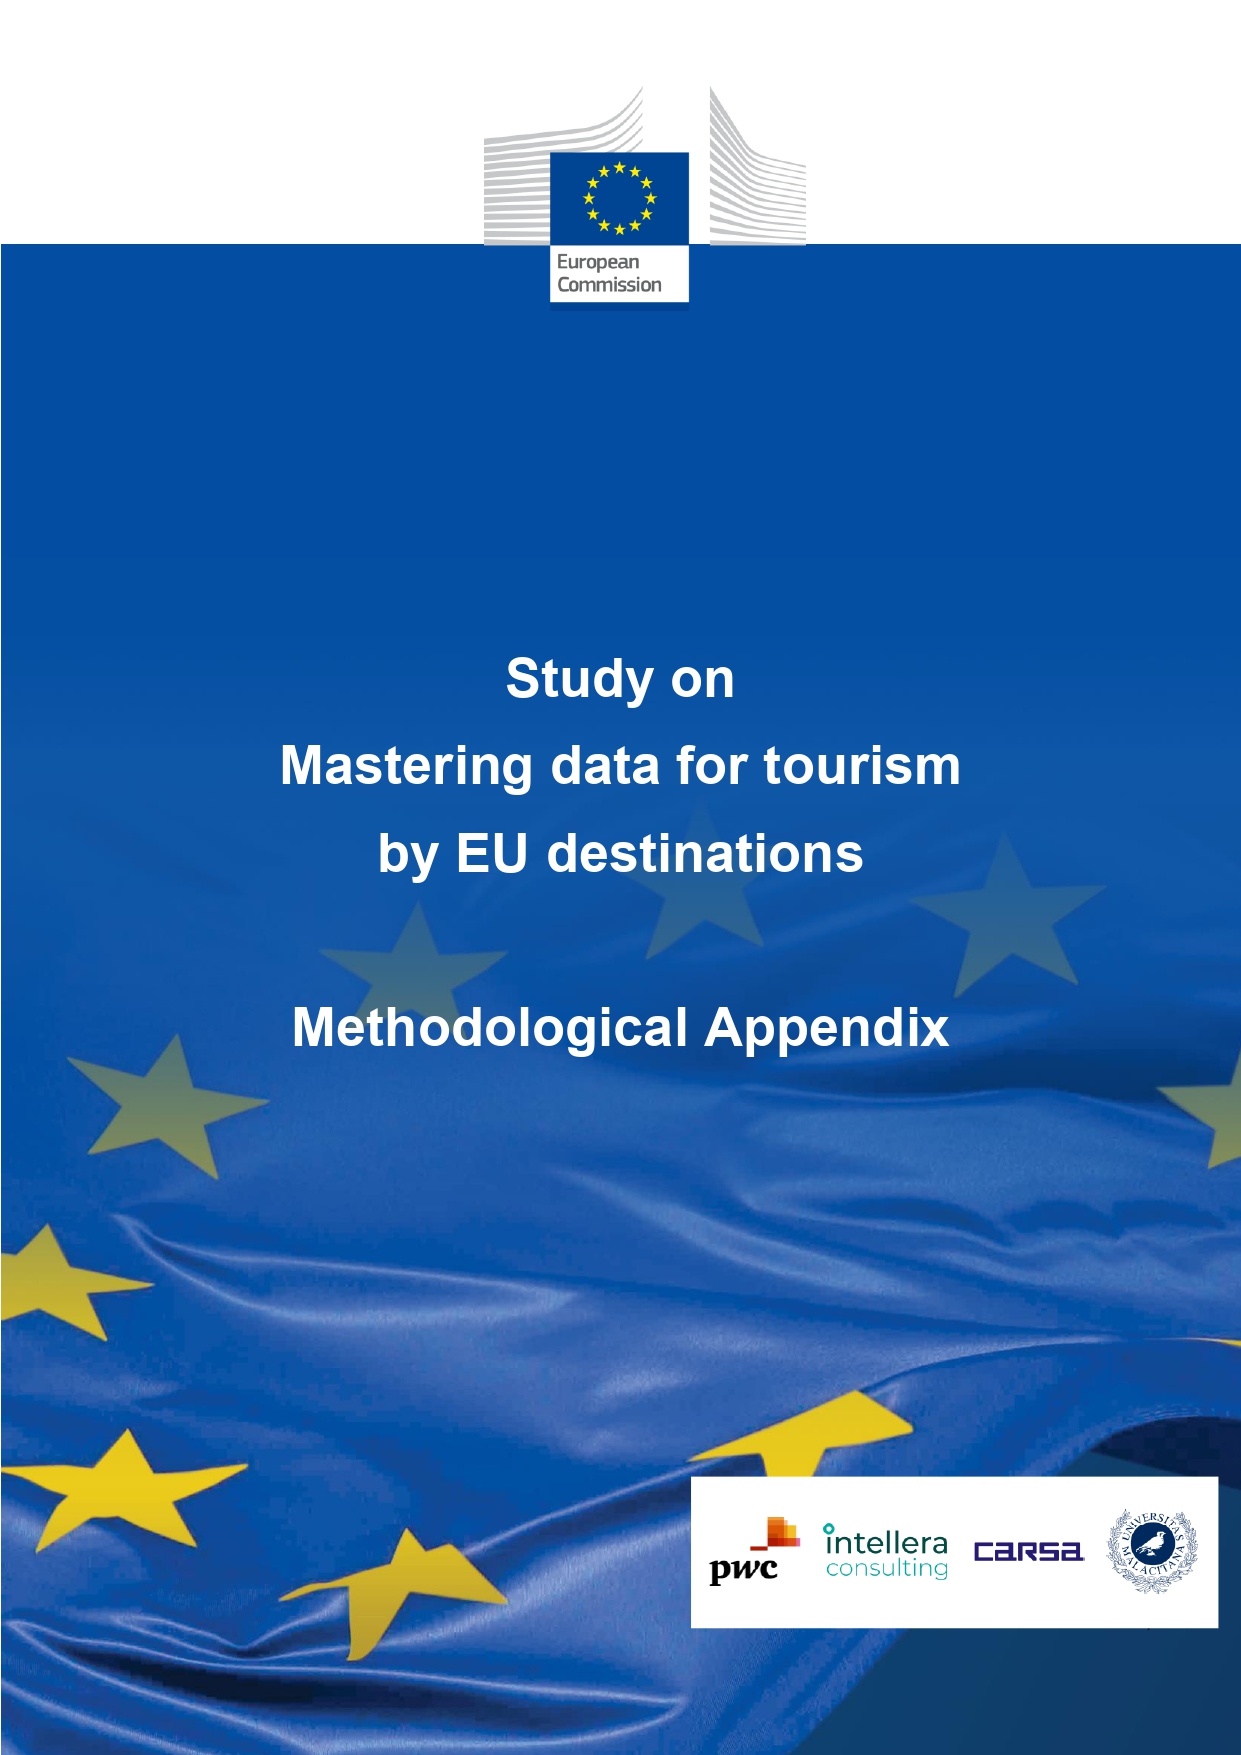 study on mastering data for tourism by eu destinations-Methodological Appendix